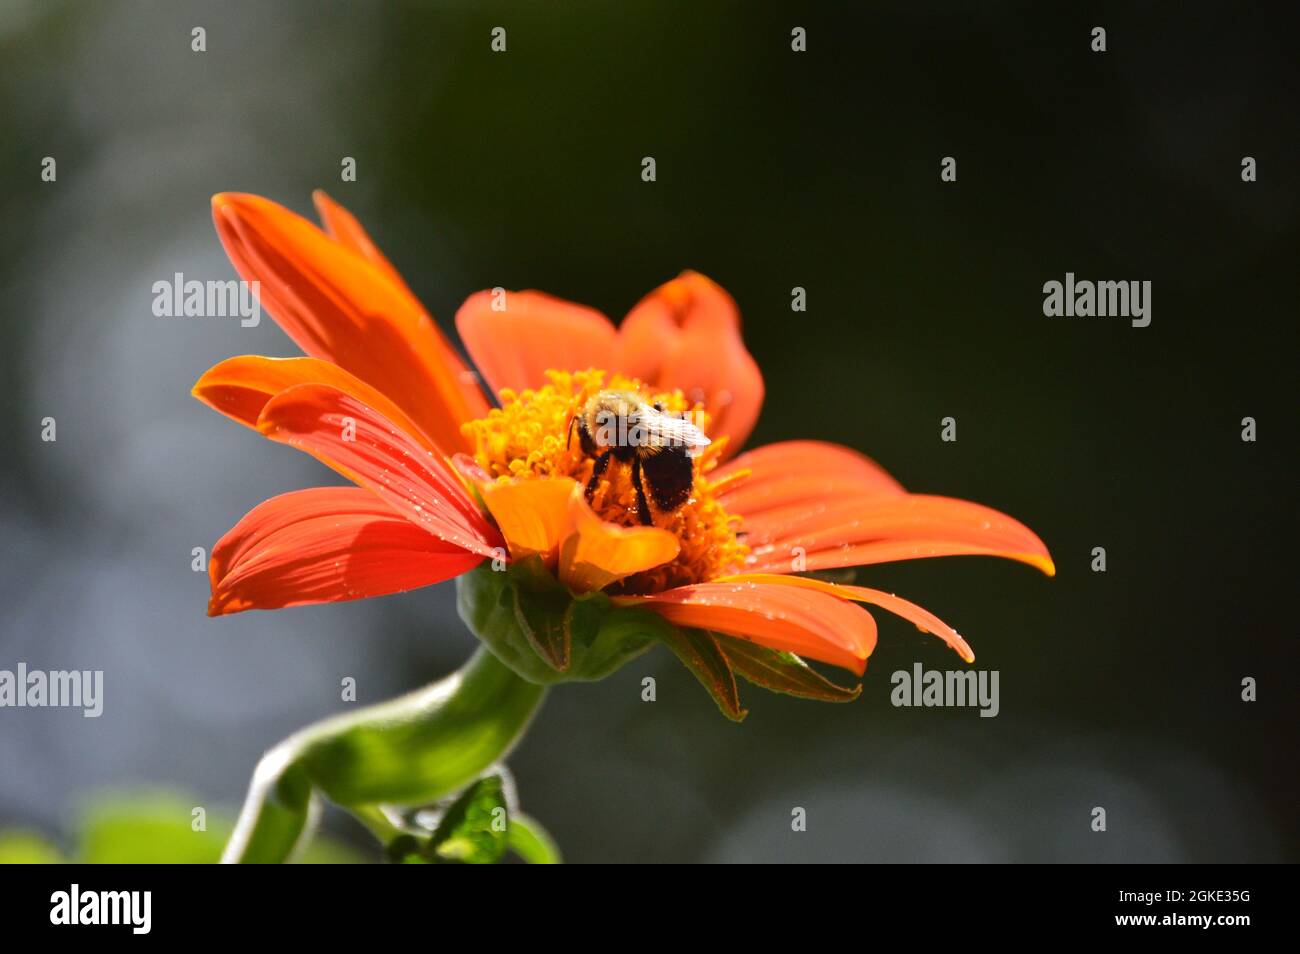 Macro up close bumble bee pollinating Mexican sunflower, Tithonia Rotundifolia, torch variety. Background blurred Stock Photo